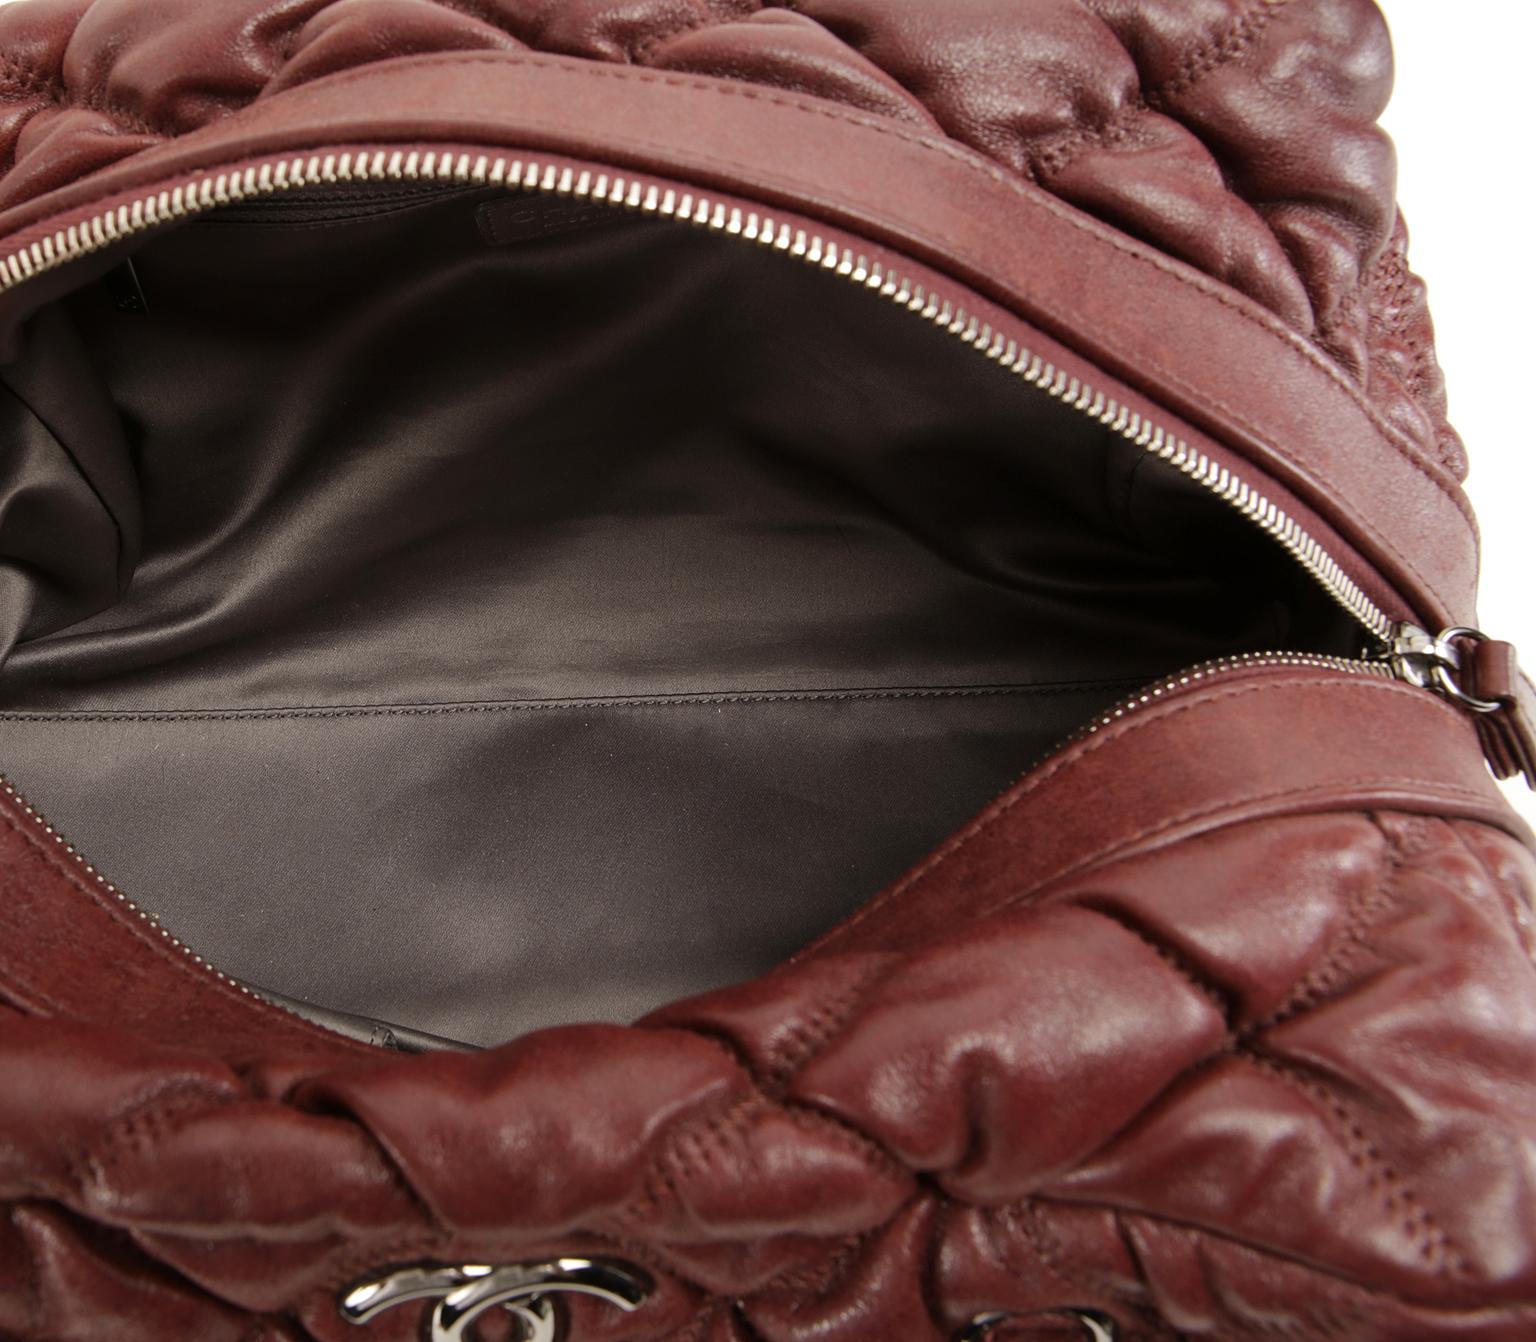 Chanel Dark Red Leather Bubble Quilt Bag 4